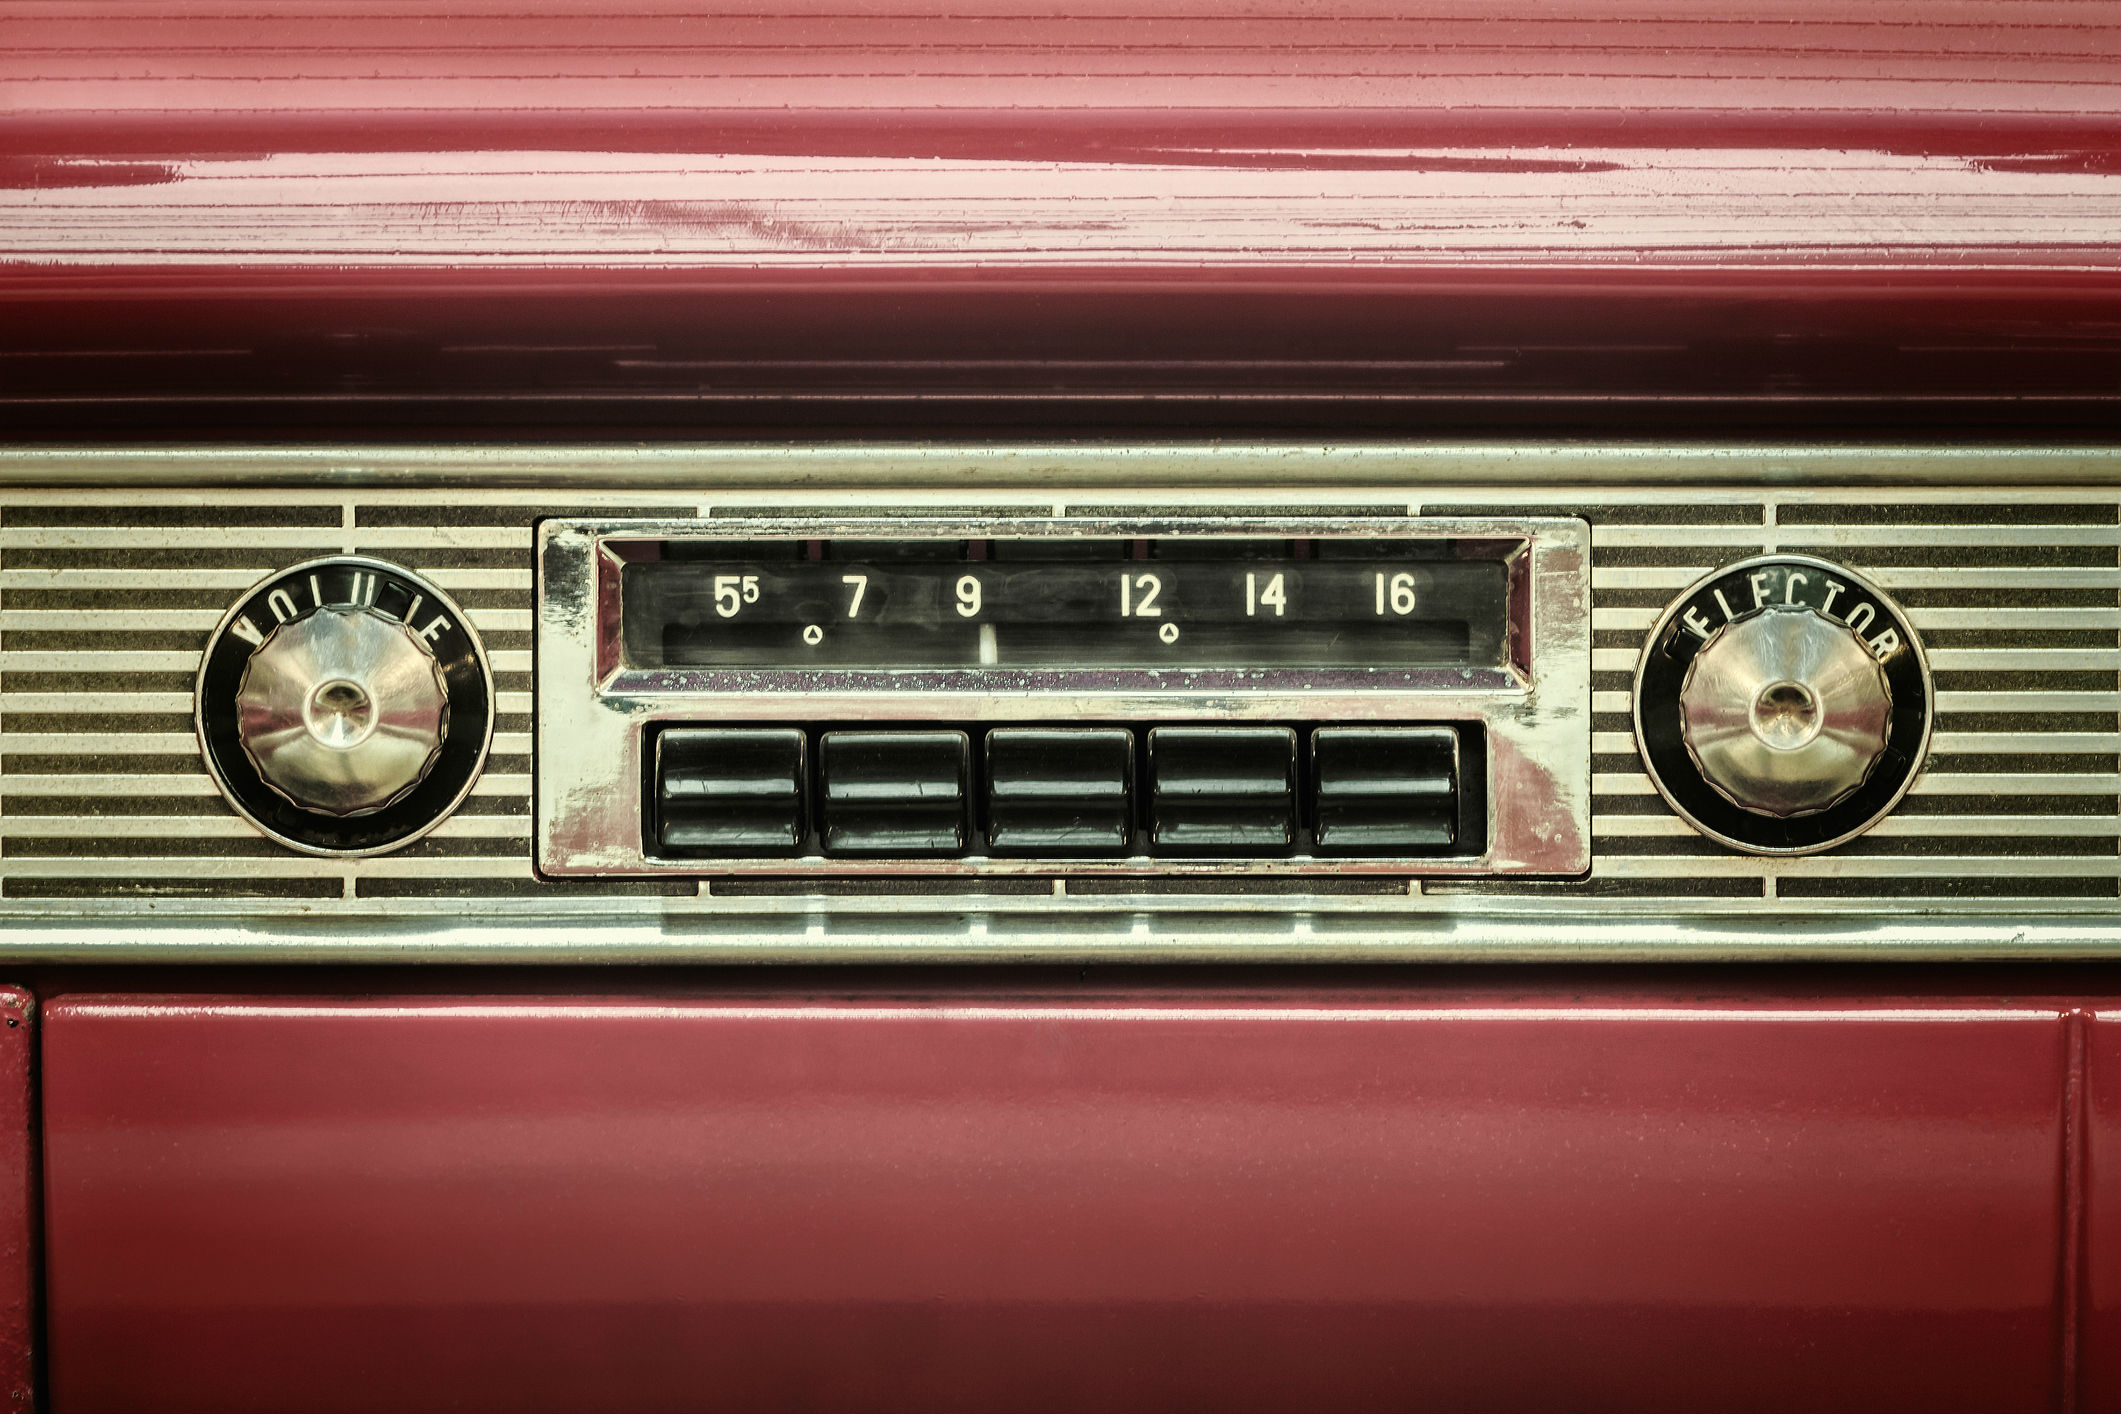 Tuned to perfection: how to upgrade an old car stereo to stream music